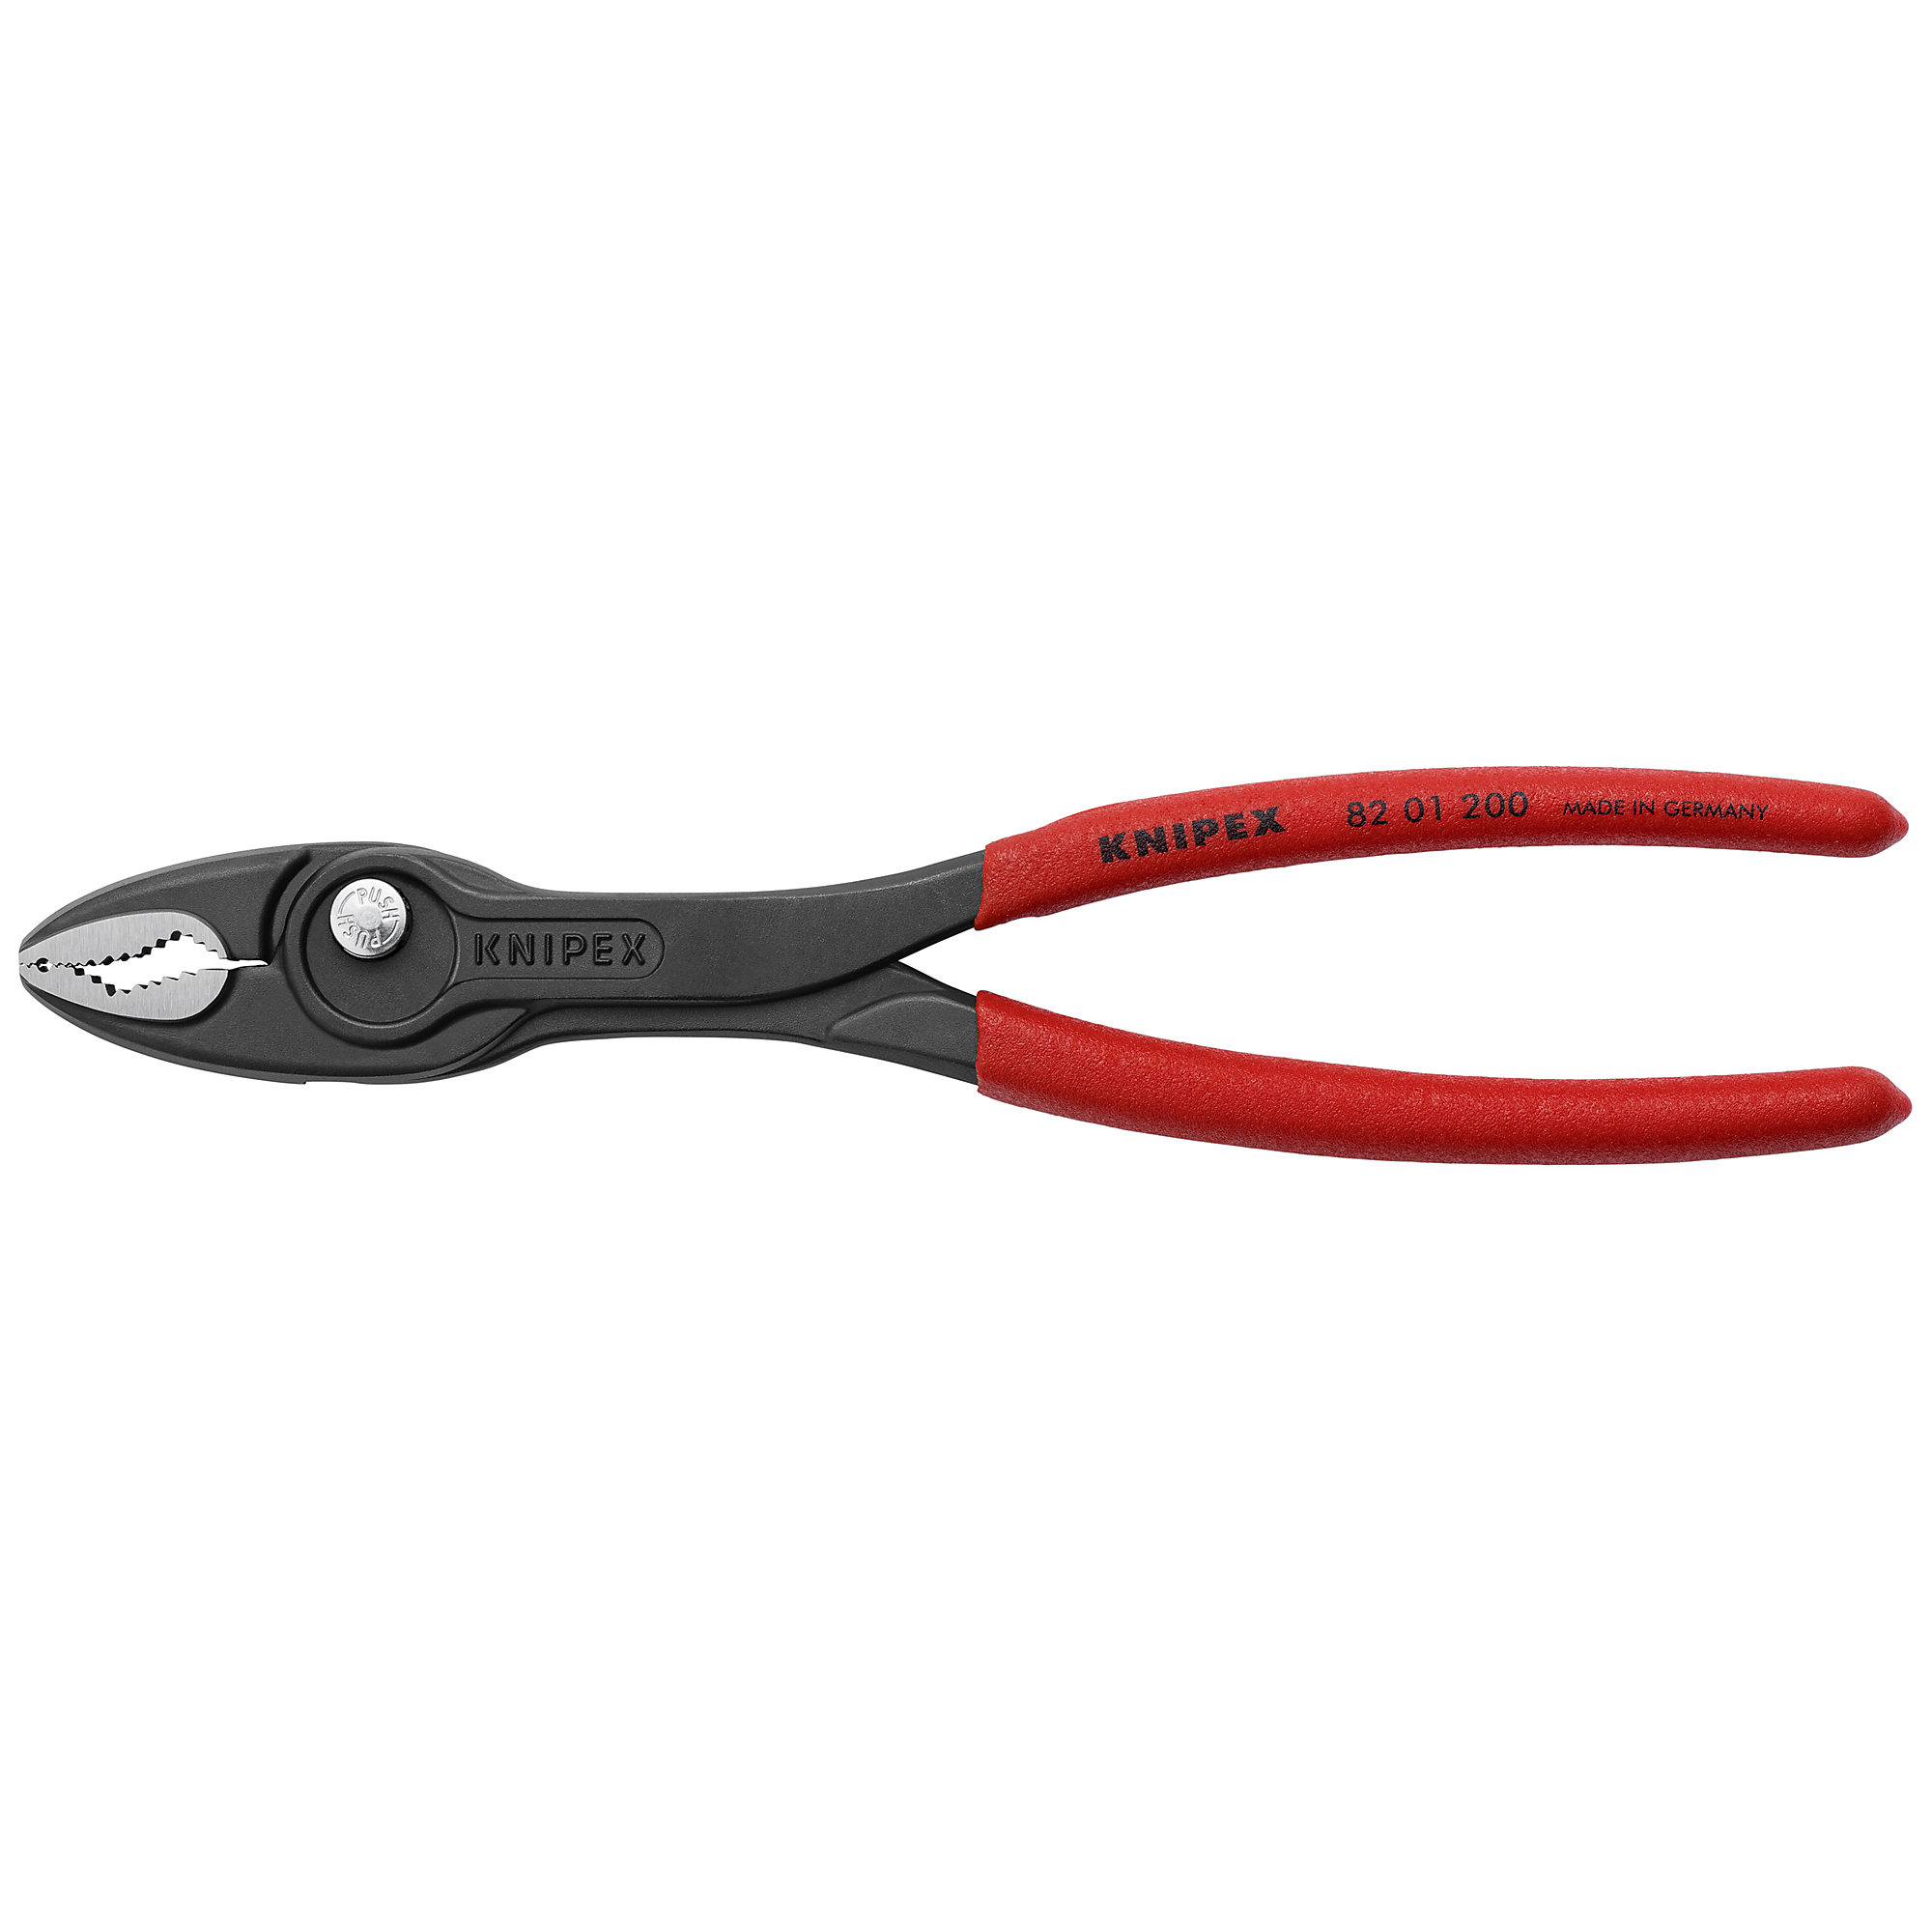 KNIPEX TwinGrip, TwinGrip, Non-slip plastic, Bulk, 8Inch, Pieces (qty.) 1 Material Steel, Jaw Capacity 0.875 in, Model 82 01 200